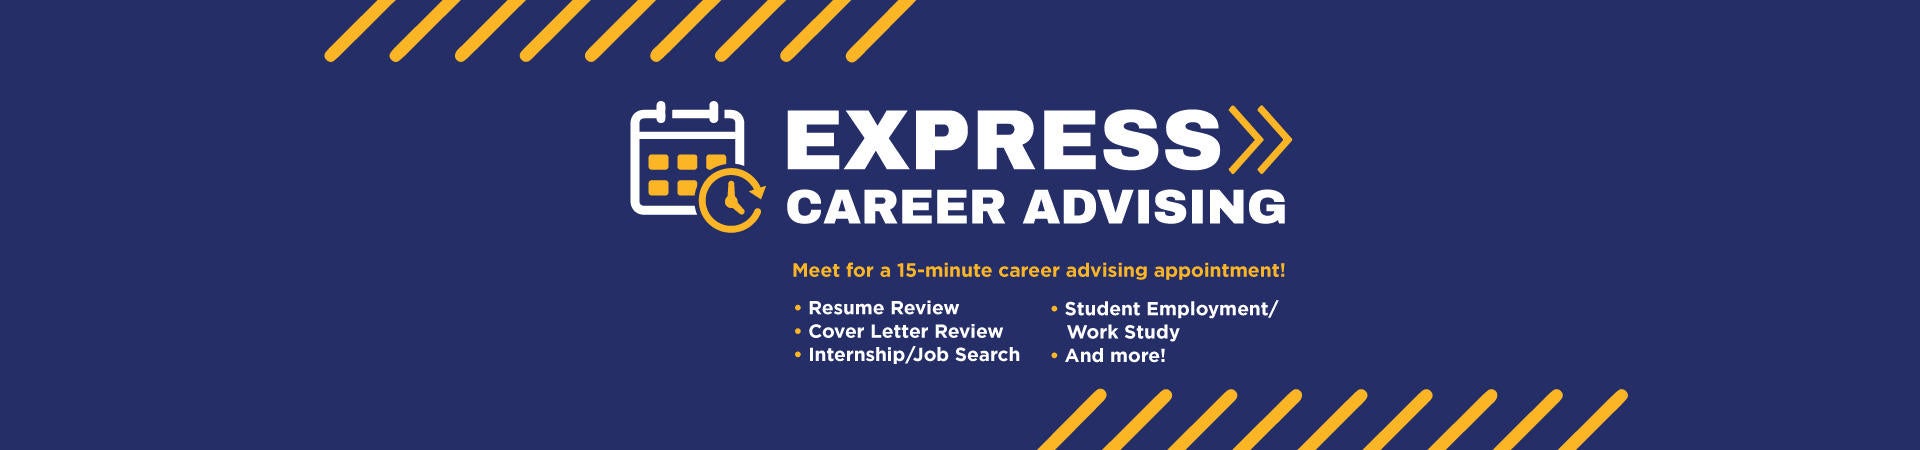 Express Career Advising - Meet for a 15-minute career advising appointment!